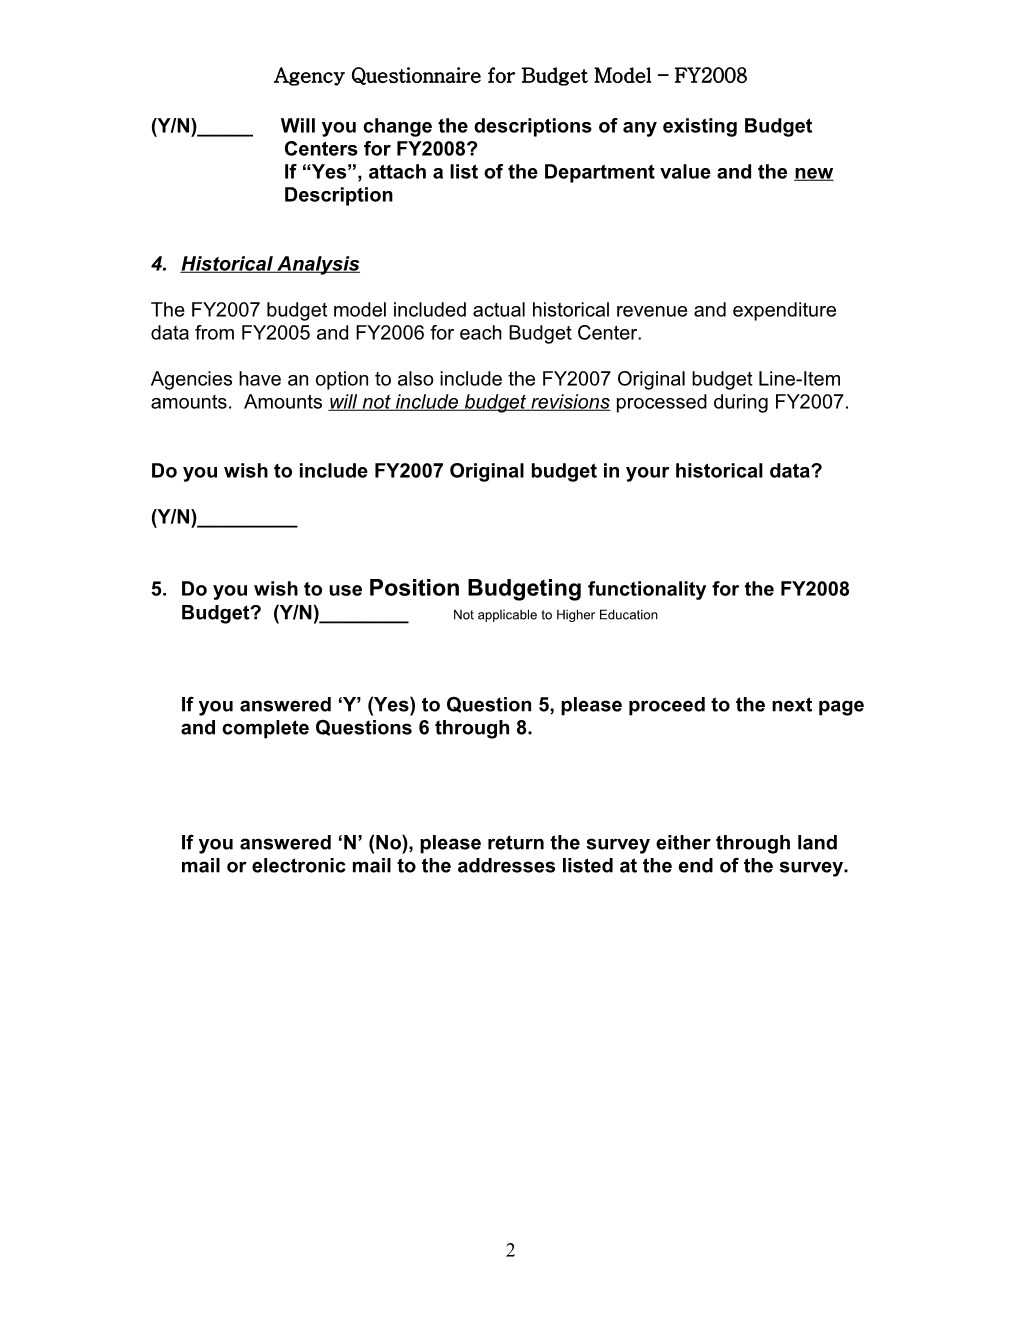 Agency Questionnaire for Budget Model FY2007